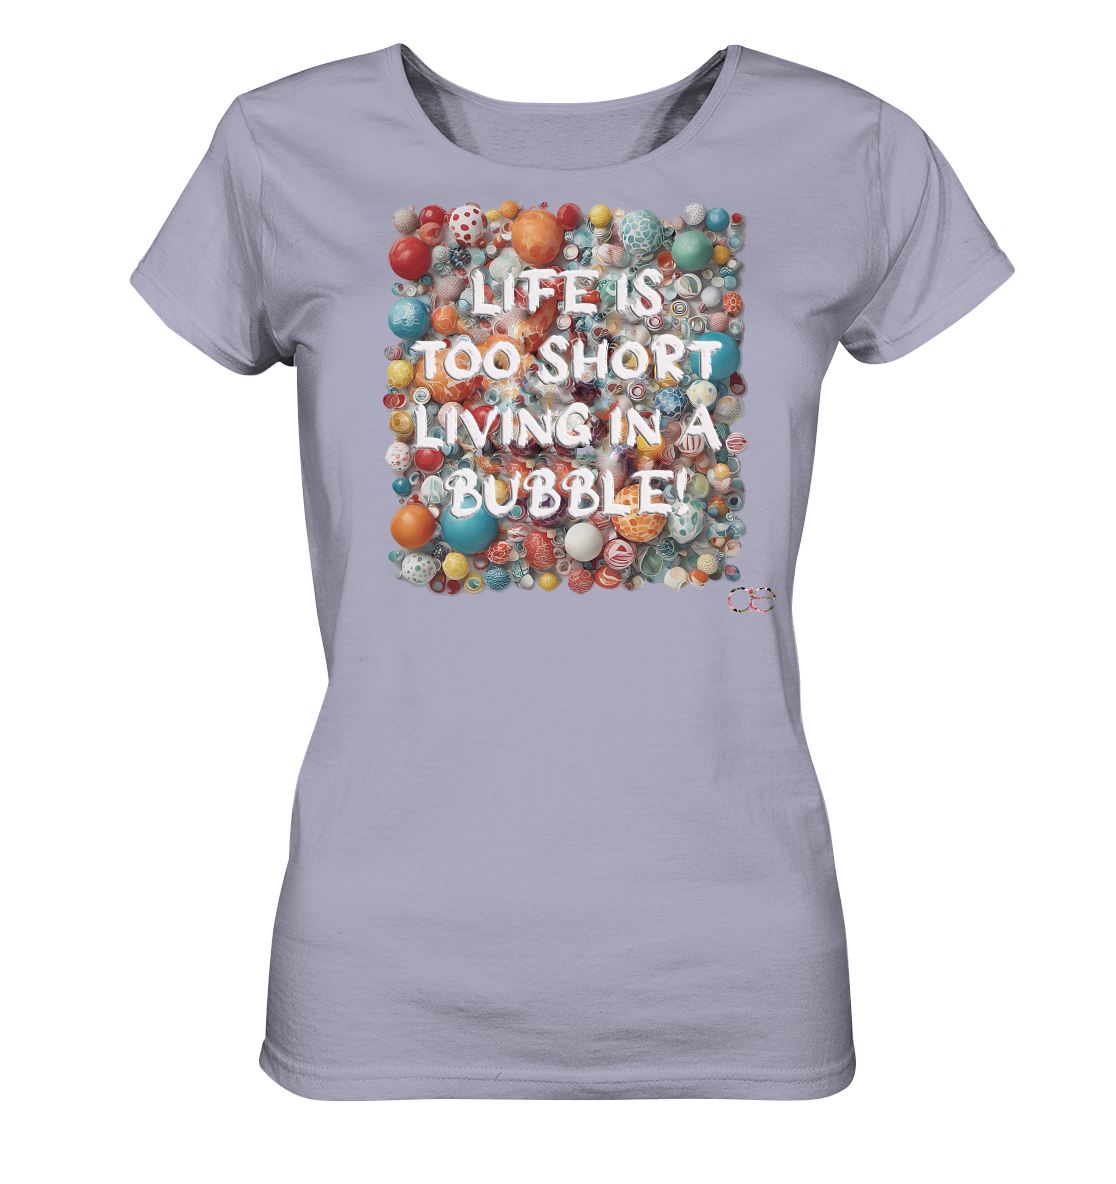 LIFE IS TOO SHORT LIVING IN A BUBBLE  - Ladies Organic Shirt